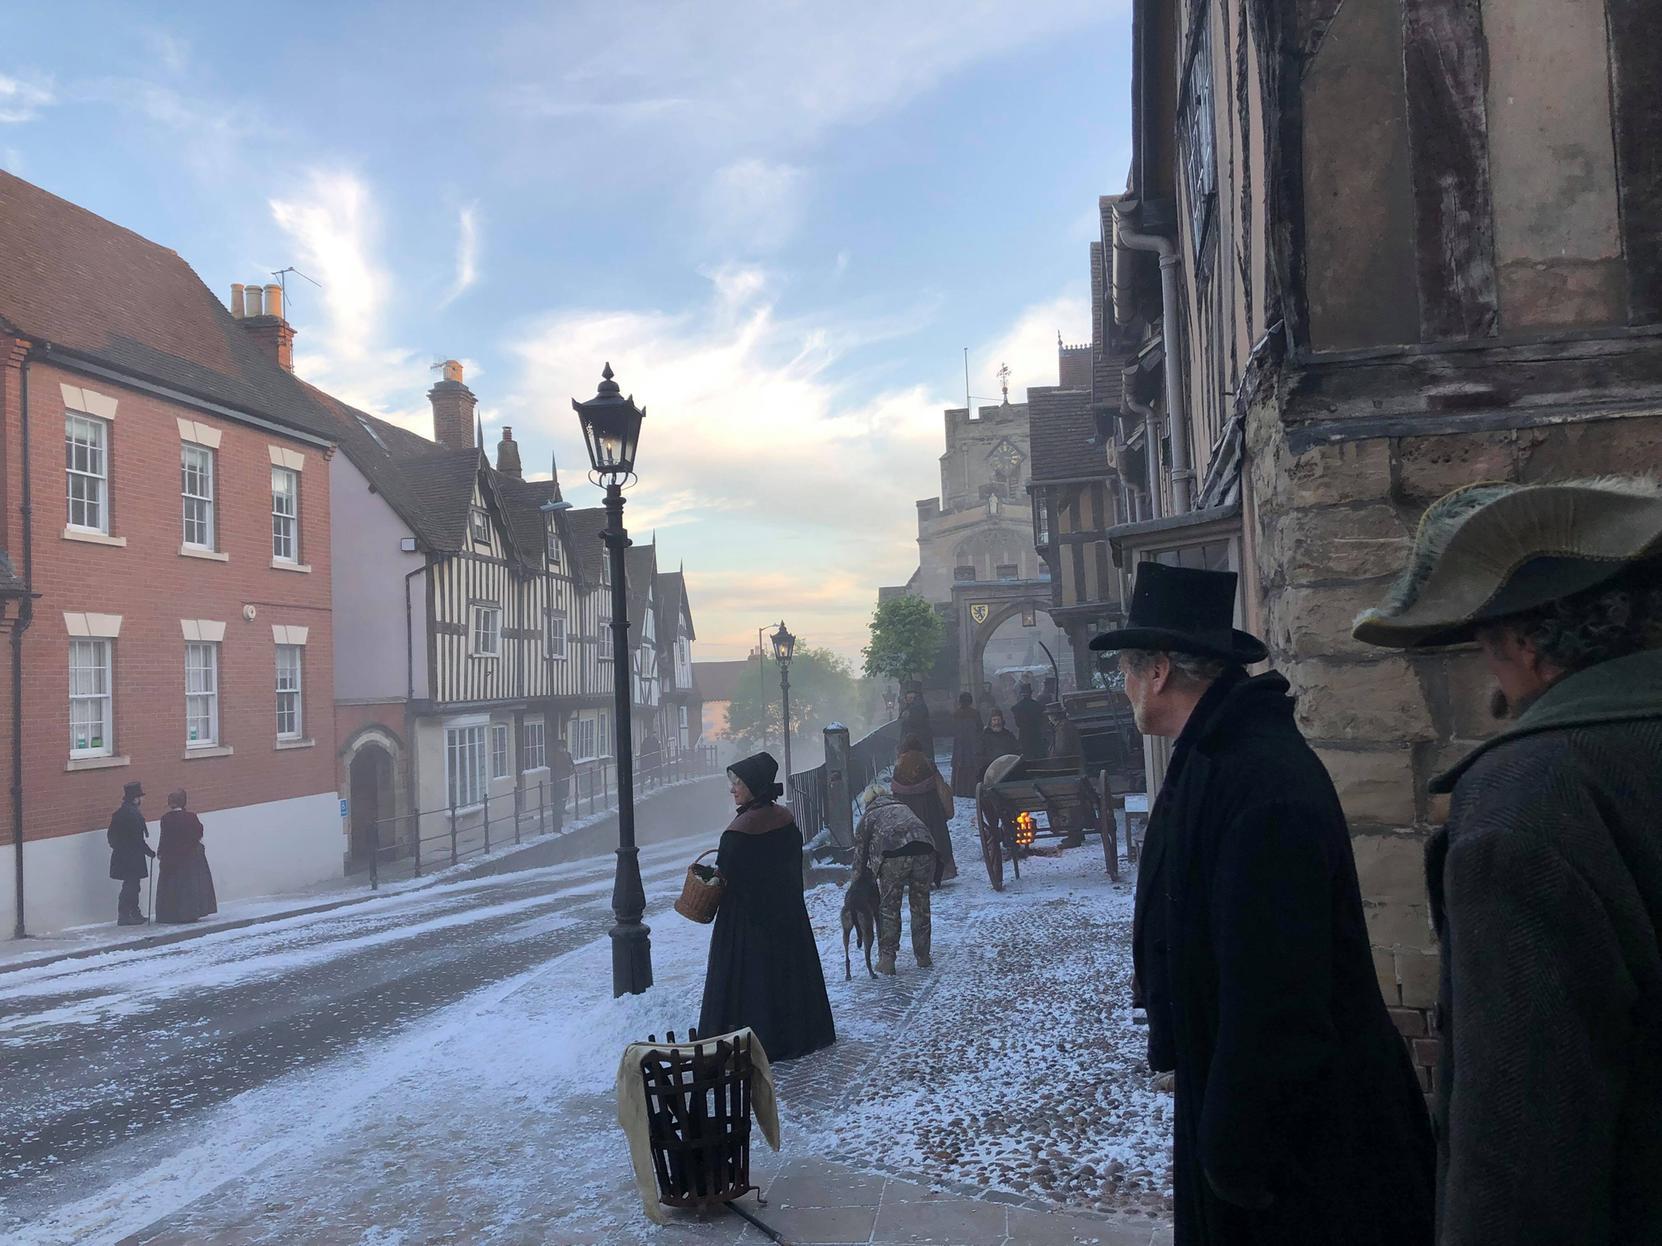 Warwick residents were greeted with the unusual site of snow in June - well, not real snow. The BBC film crews were at the Lord Leycester Hospital for the filming of 'A Christmas Carol'.